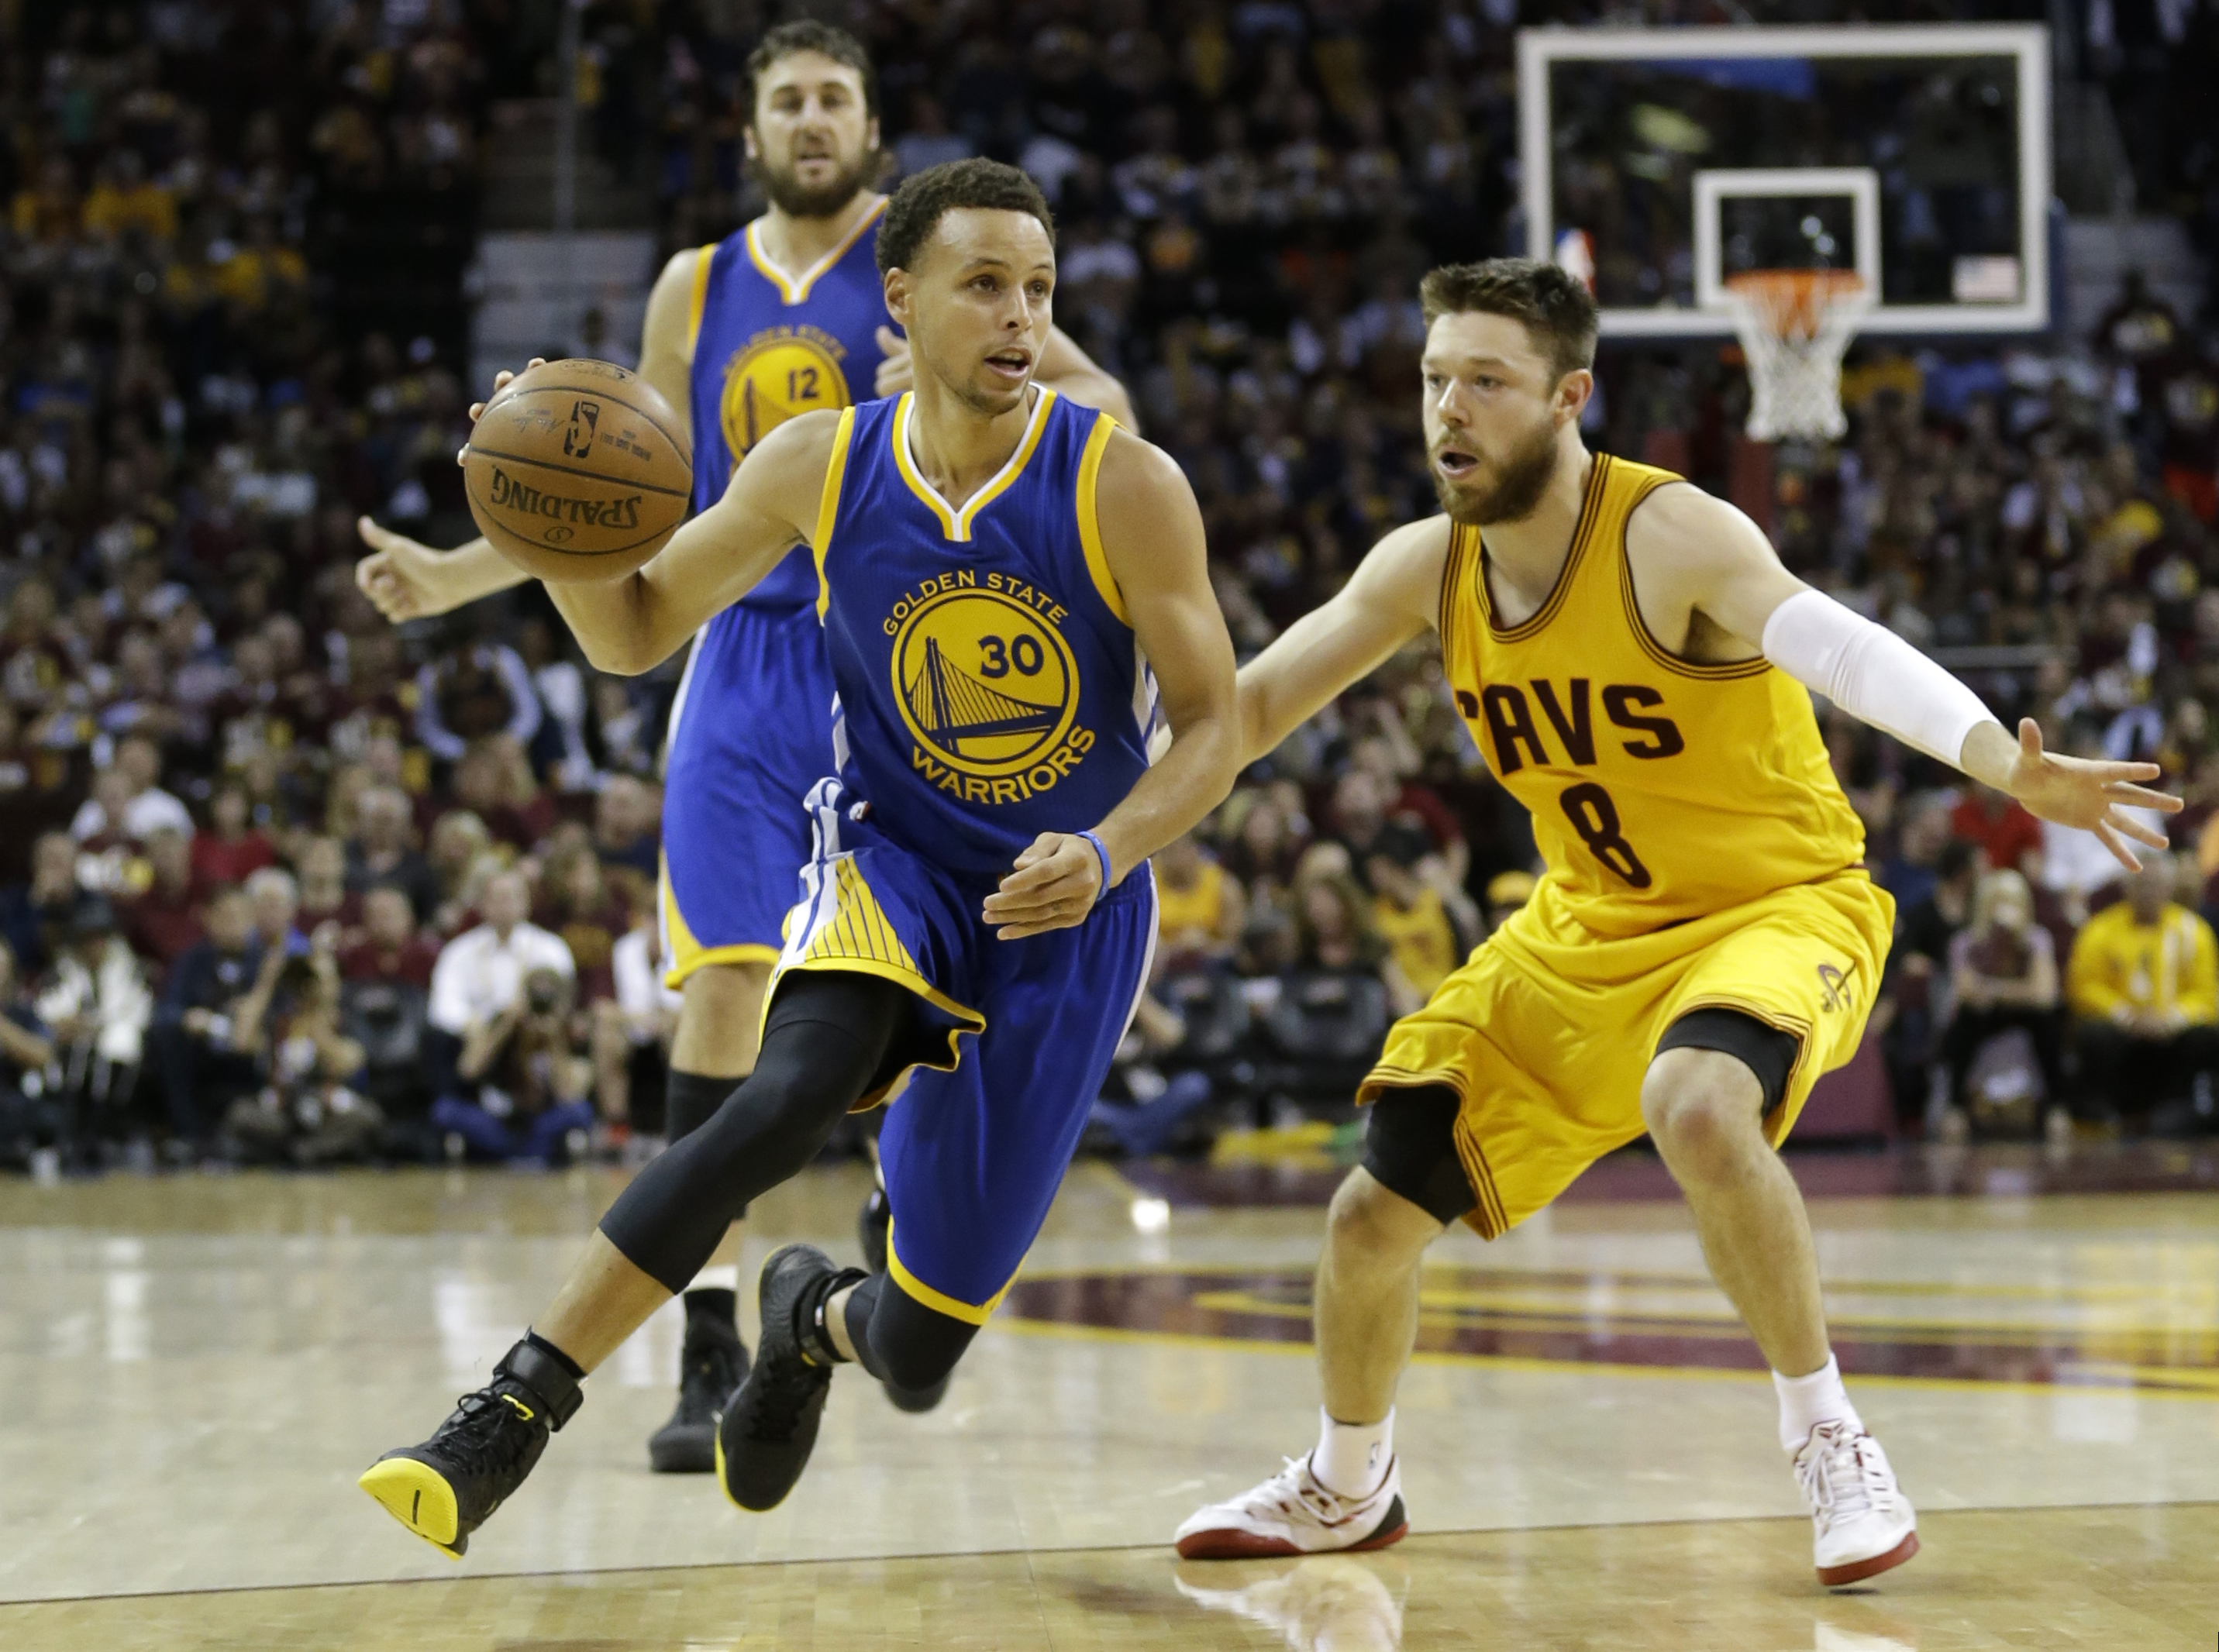 Golden State Warriors guard Stephen Curry (30) drives on Cleveland Cavaliers guard Matthew Dellavedova (8) during the second half of Game 3 of basketball's NBA Finals in Cleveland, Tuesday, June 9, 2015. (AP Photo/Tony Dejak)